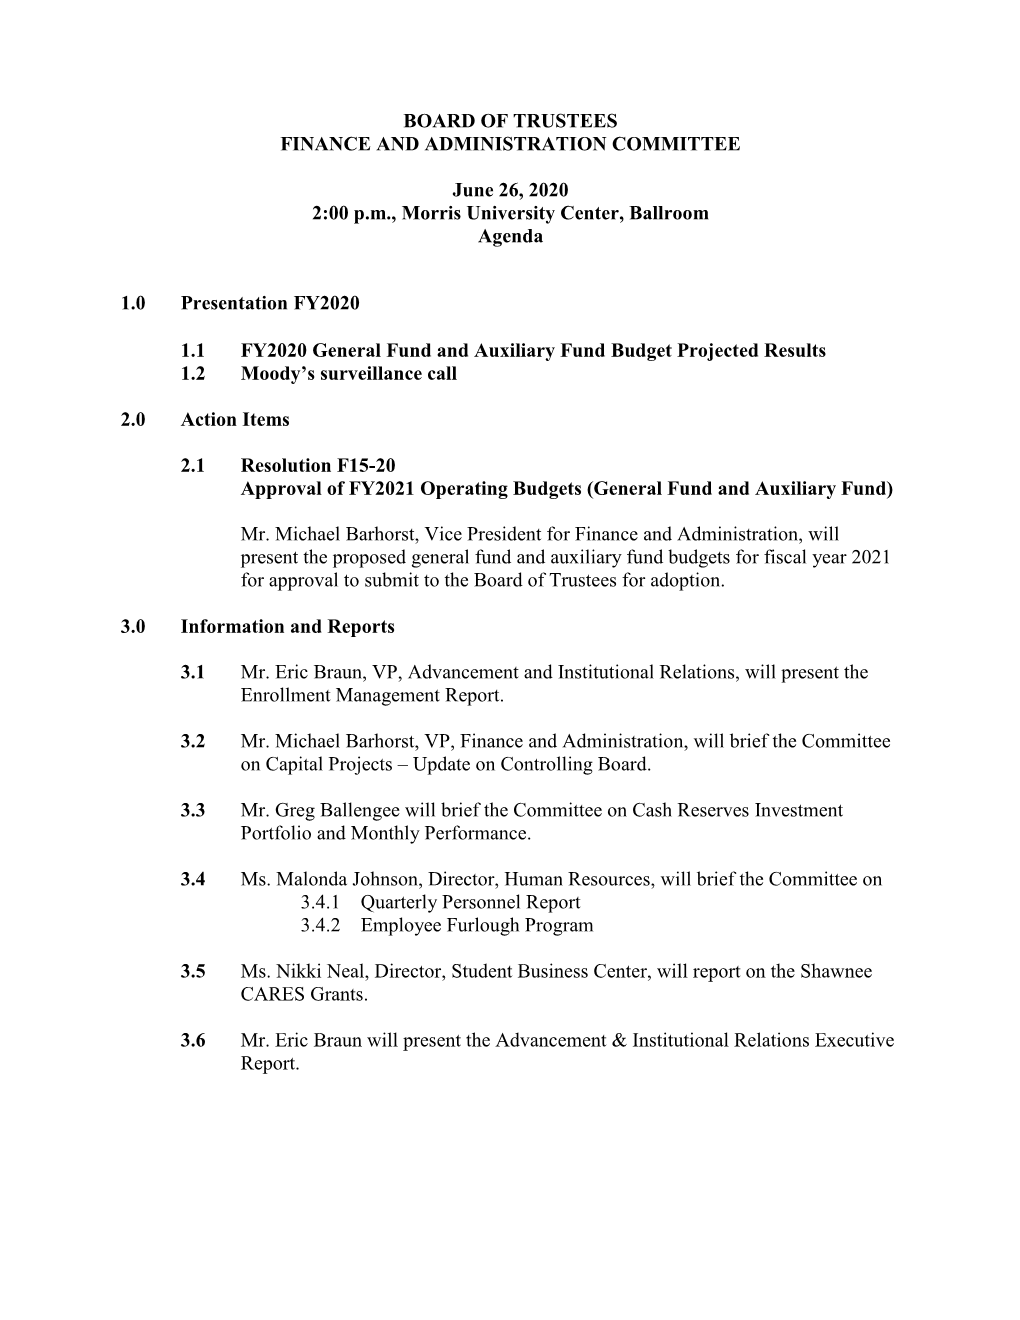 FINANCE and ADMINISTRATION COMMITTEE Agenda